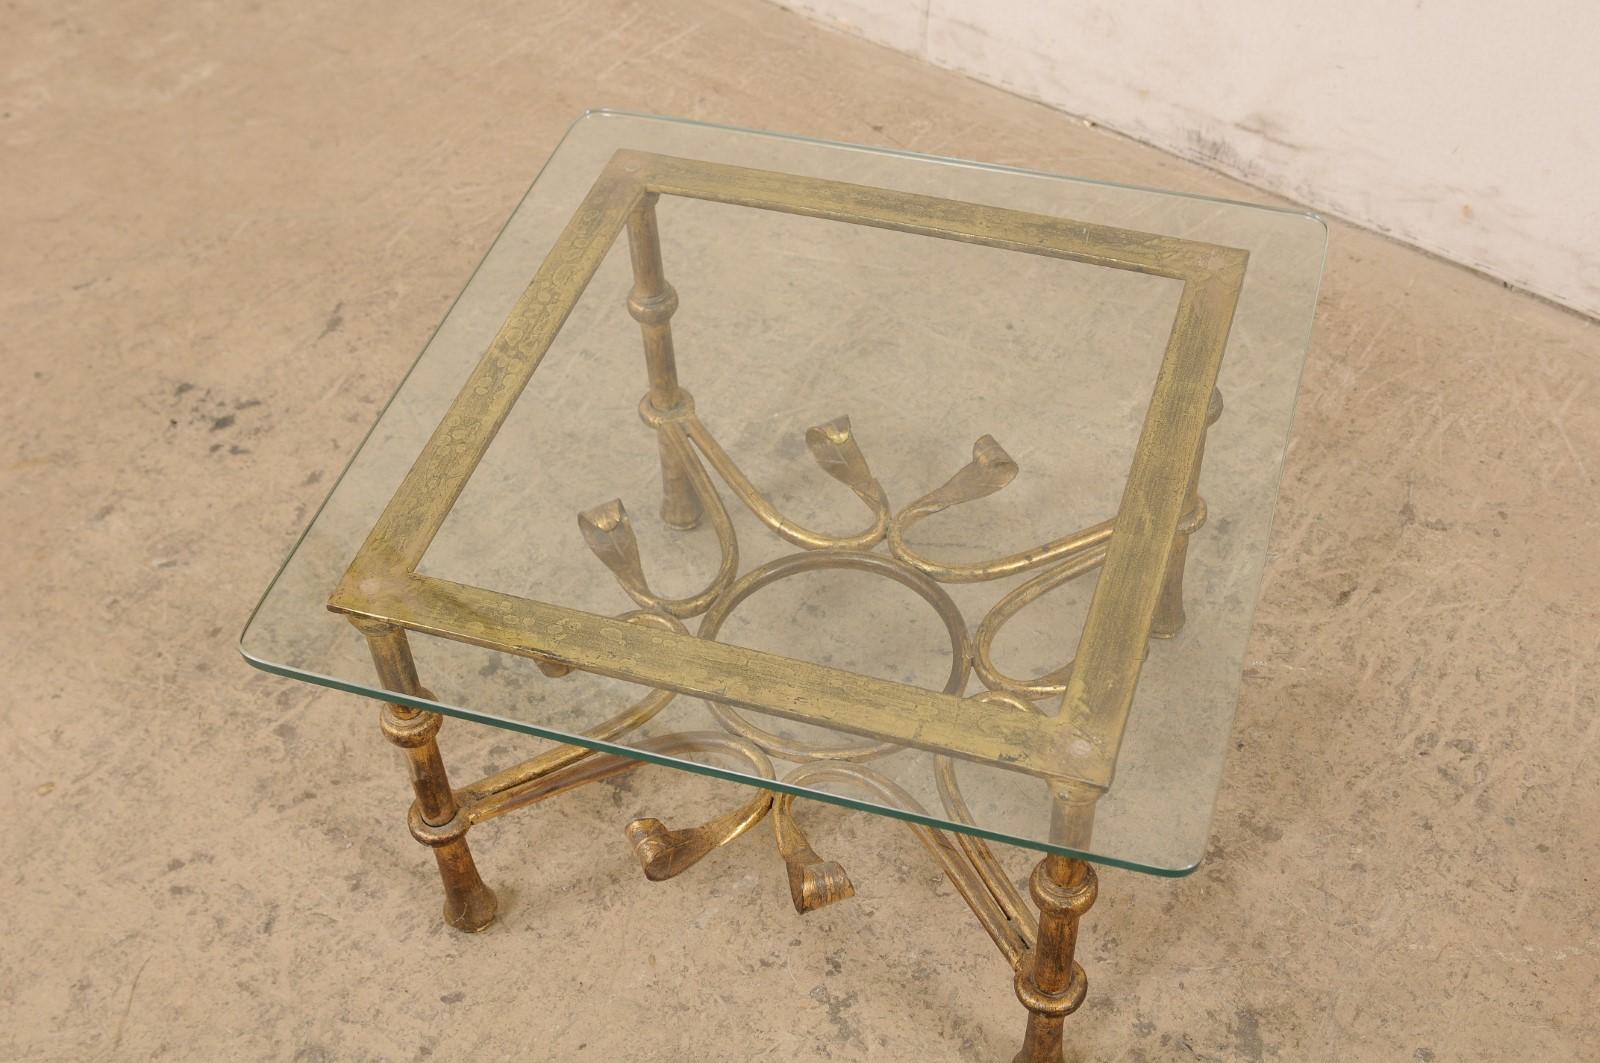 20th Century Spanish Accent Table with Gilt Iron Base & Square-Shaped Glass Top, Mid 20th C. For Sale